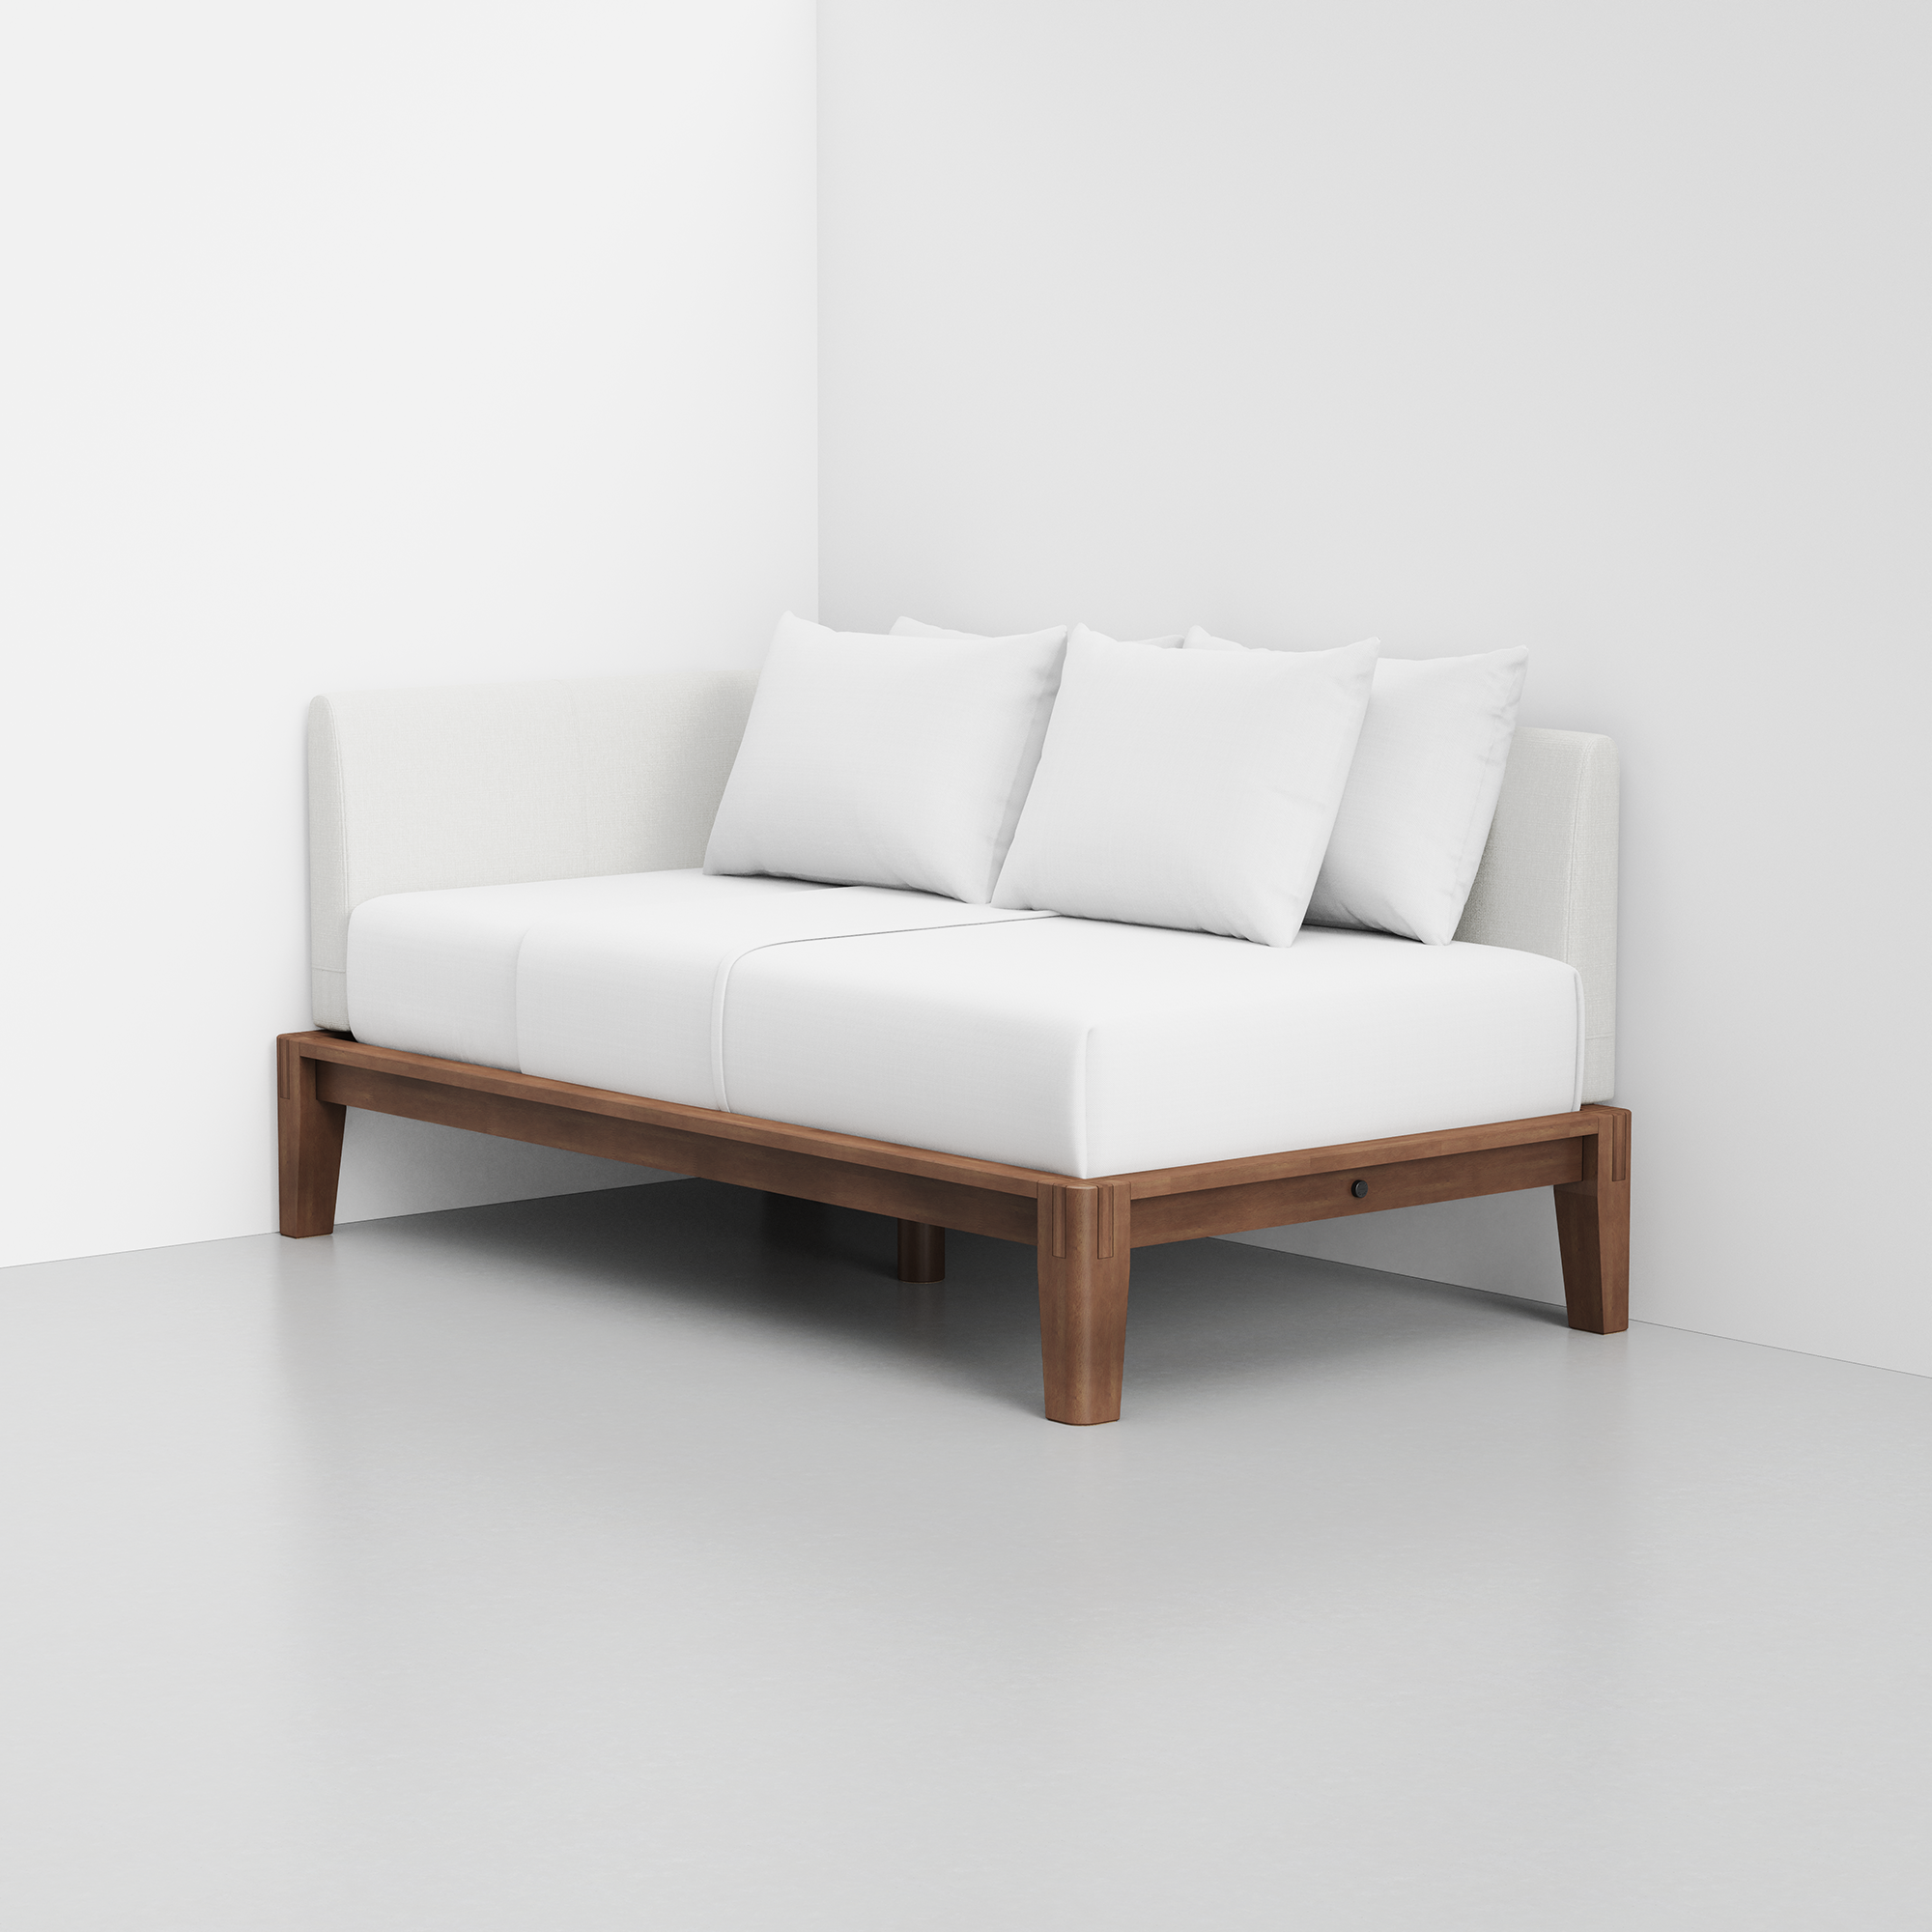 PDP Image: The Daybed (Walnut / Light Linen) - Rendering - Pillows Stacked